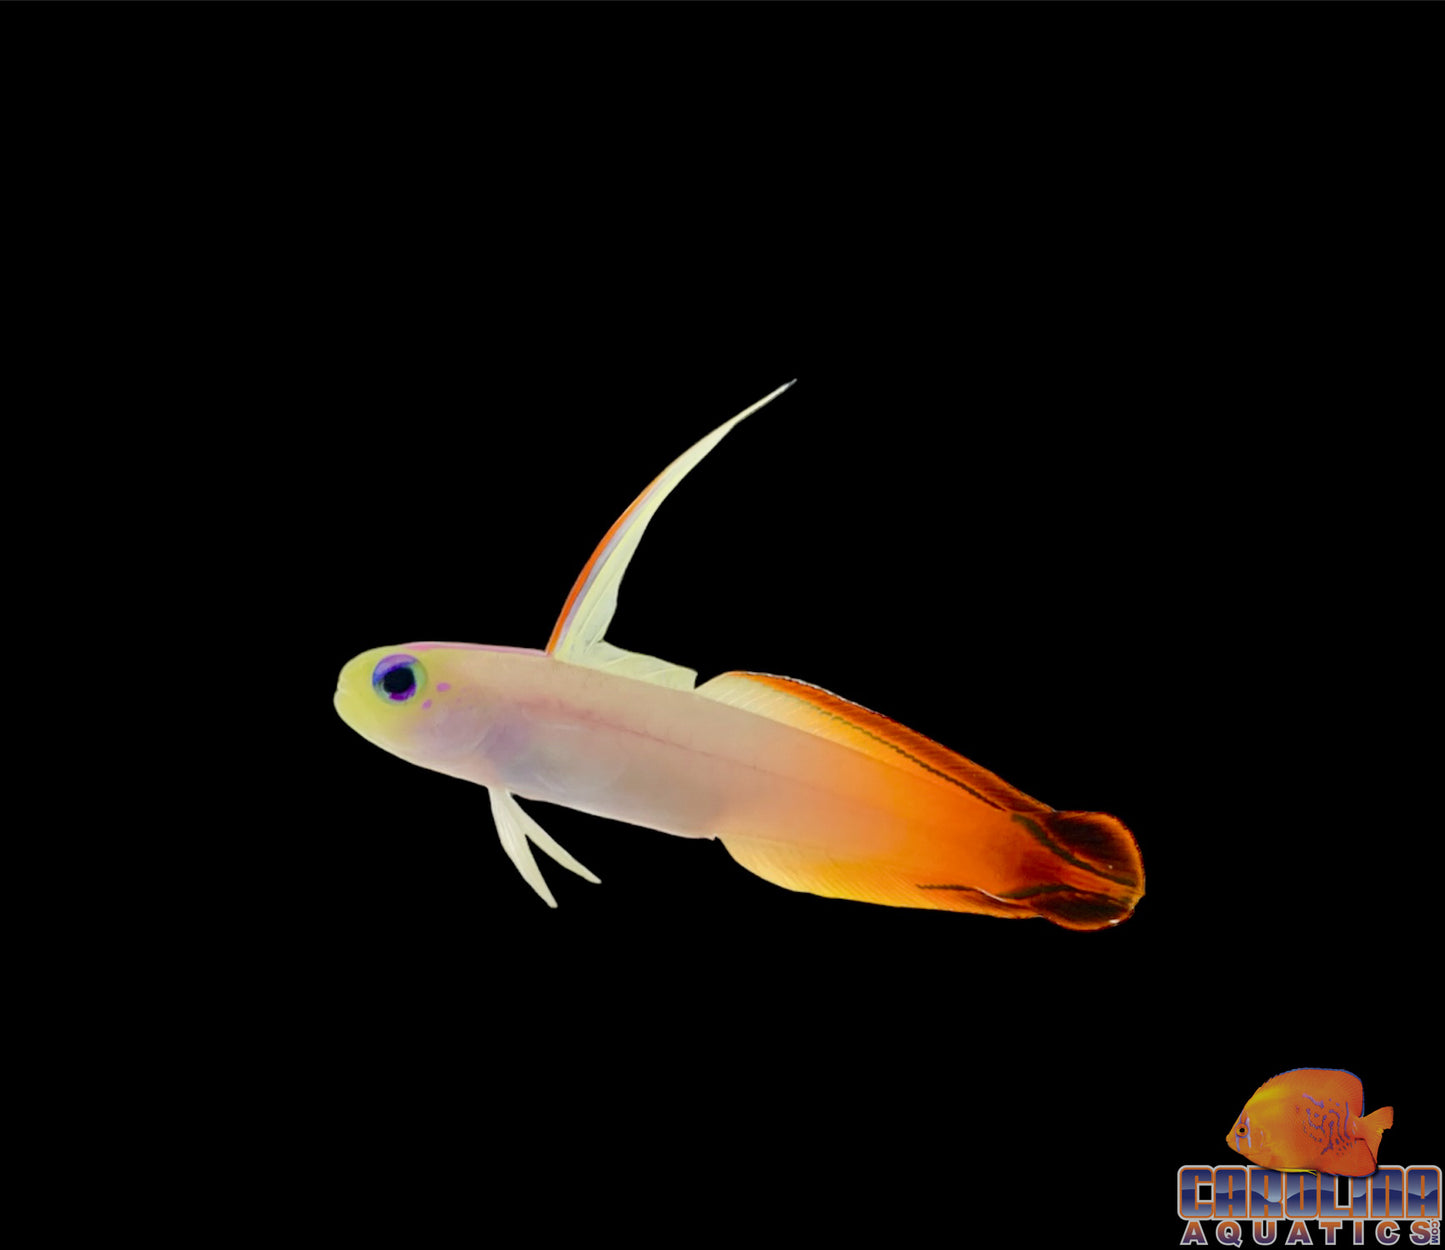 Goby - Firefish